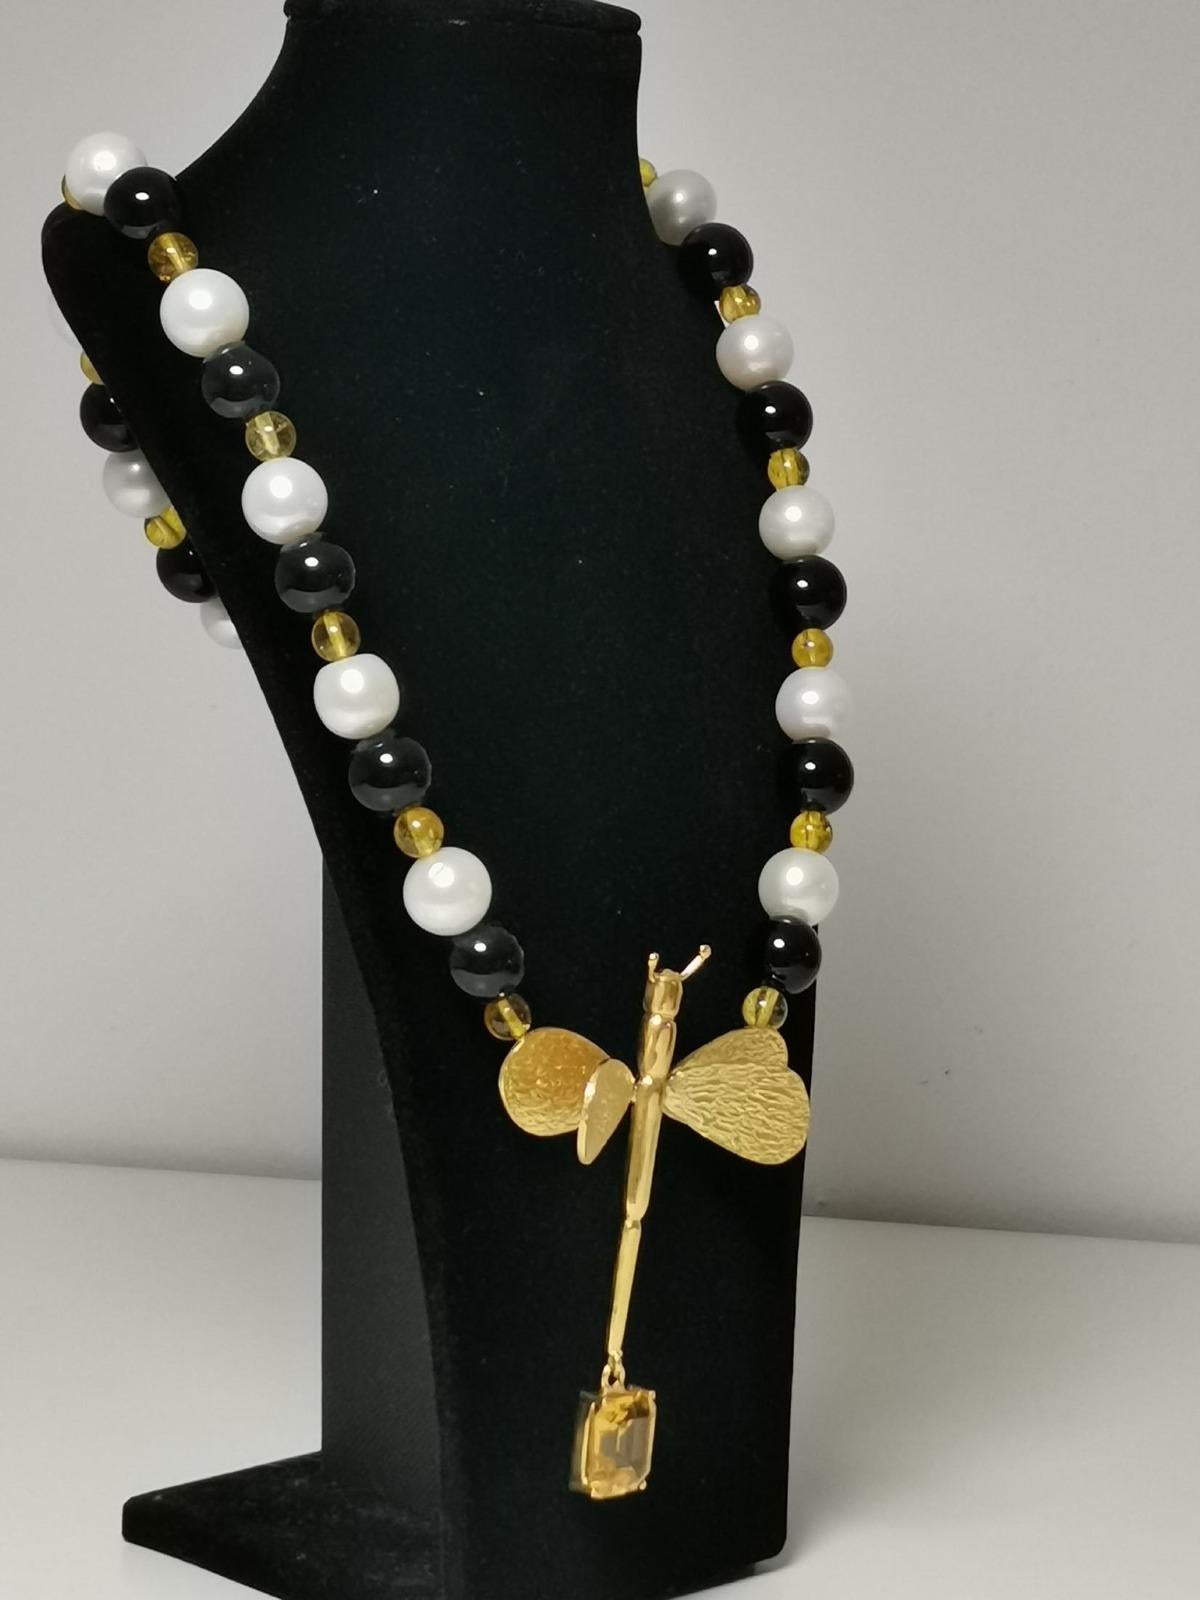 Hand-Crafted Necklace of Cultured Pearls, Extra Quality 'Akoya Japan' For Sale